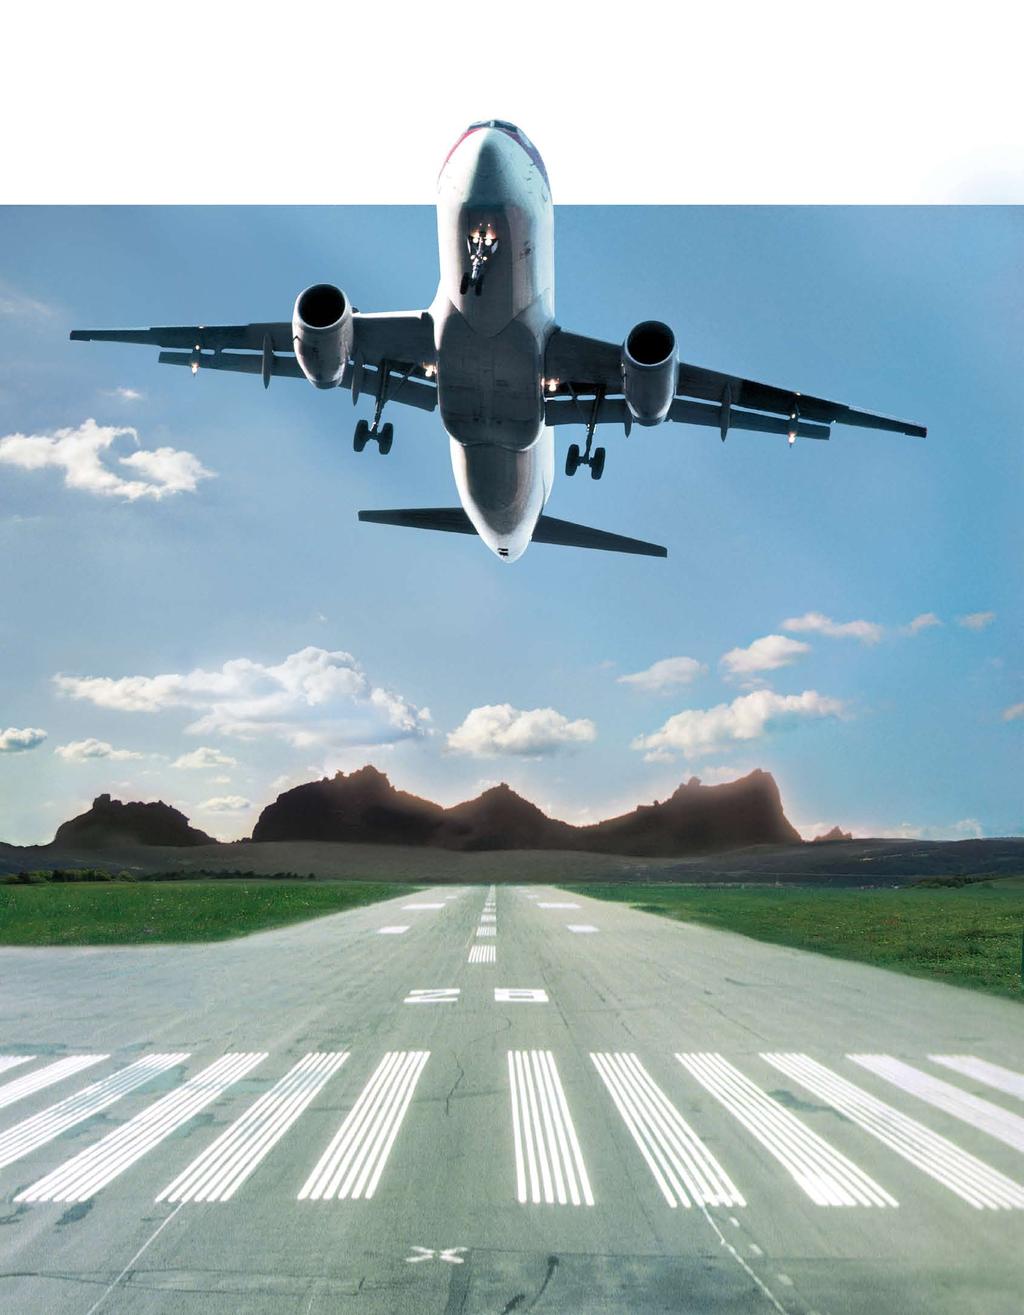 Special Applications International aerospace consortia rely on the high quality, reliability and performance of our aerospace bearings even under extreme conditions.